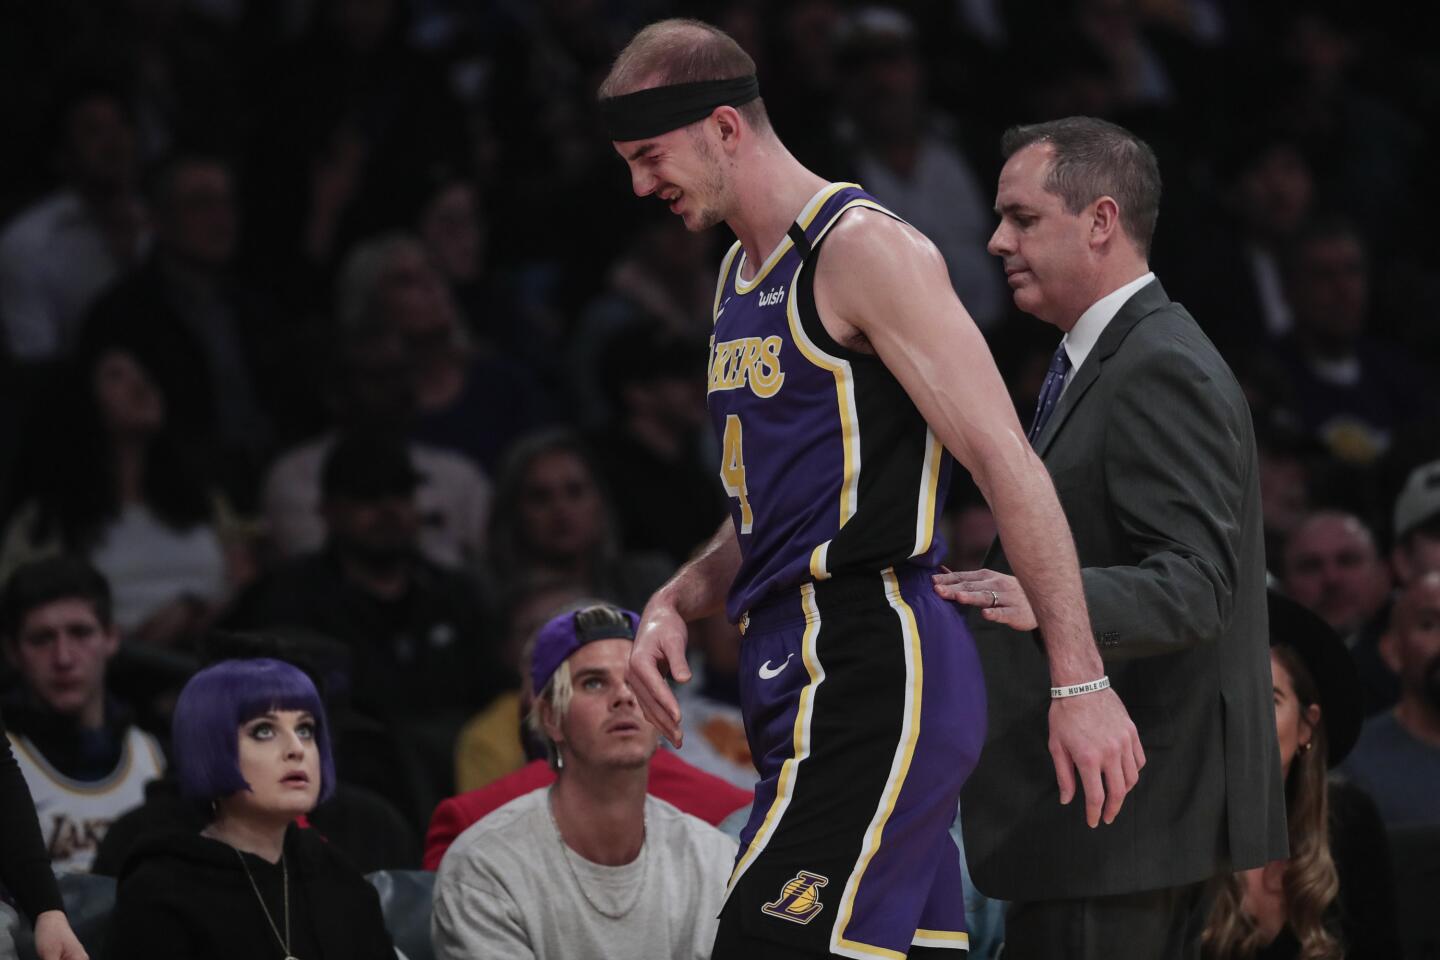 Lakers guard Alex Caruso exits after getting poked in the face.